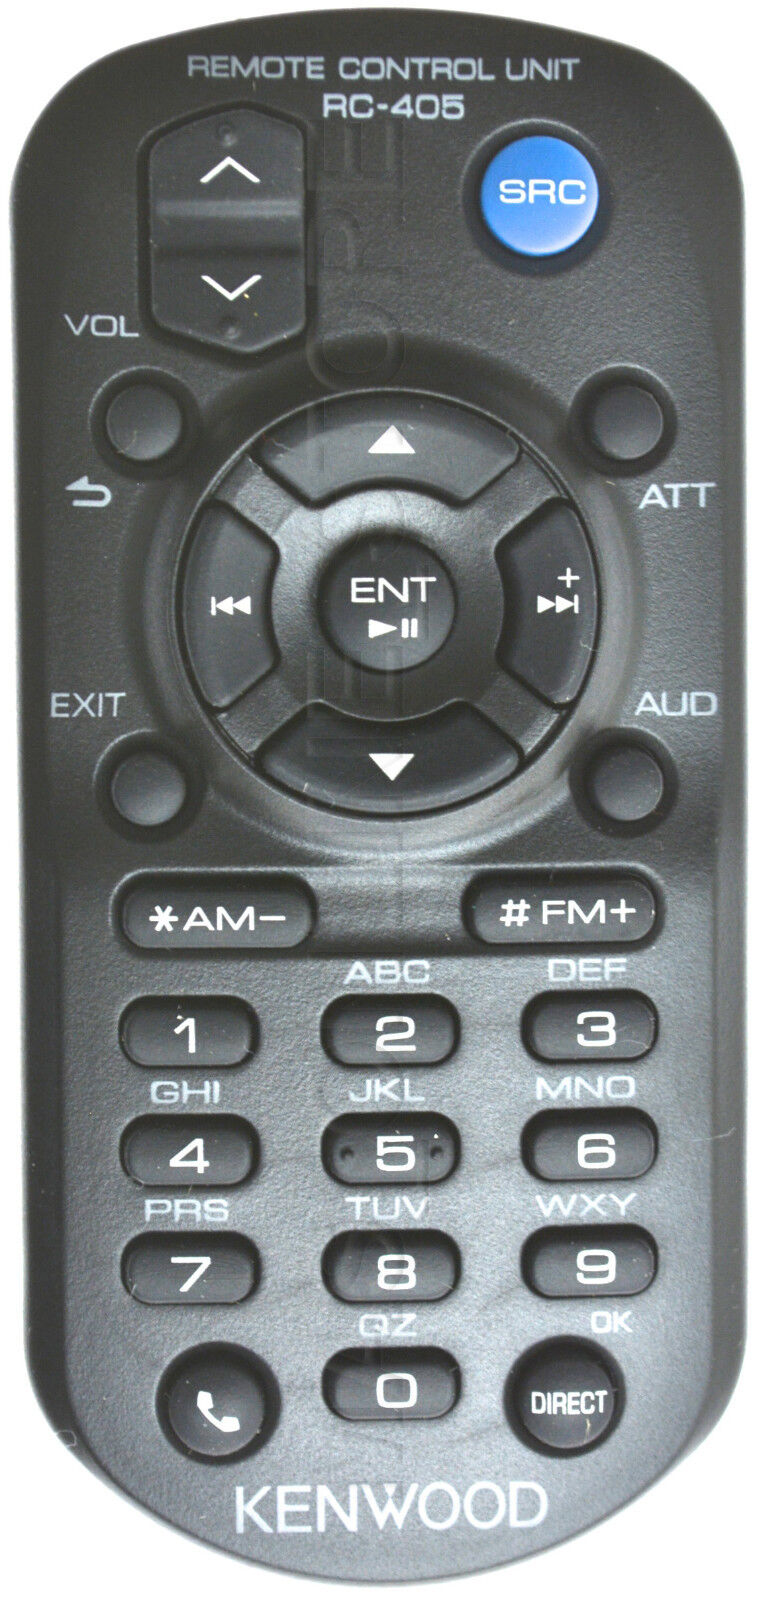 KENWOOD KDC-X995 KDCX995 GENUINE RC-405 Max 87% OFF TODAY REMOTE PAY OFFicial shop SHIPS